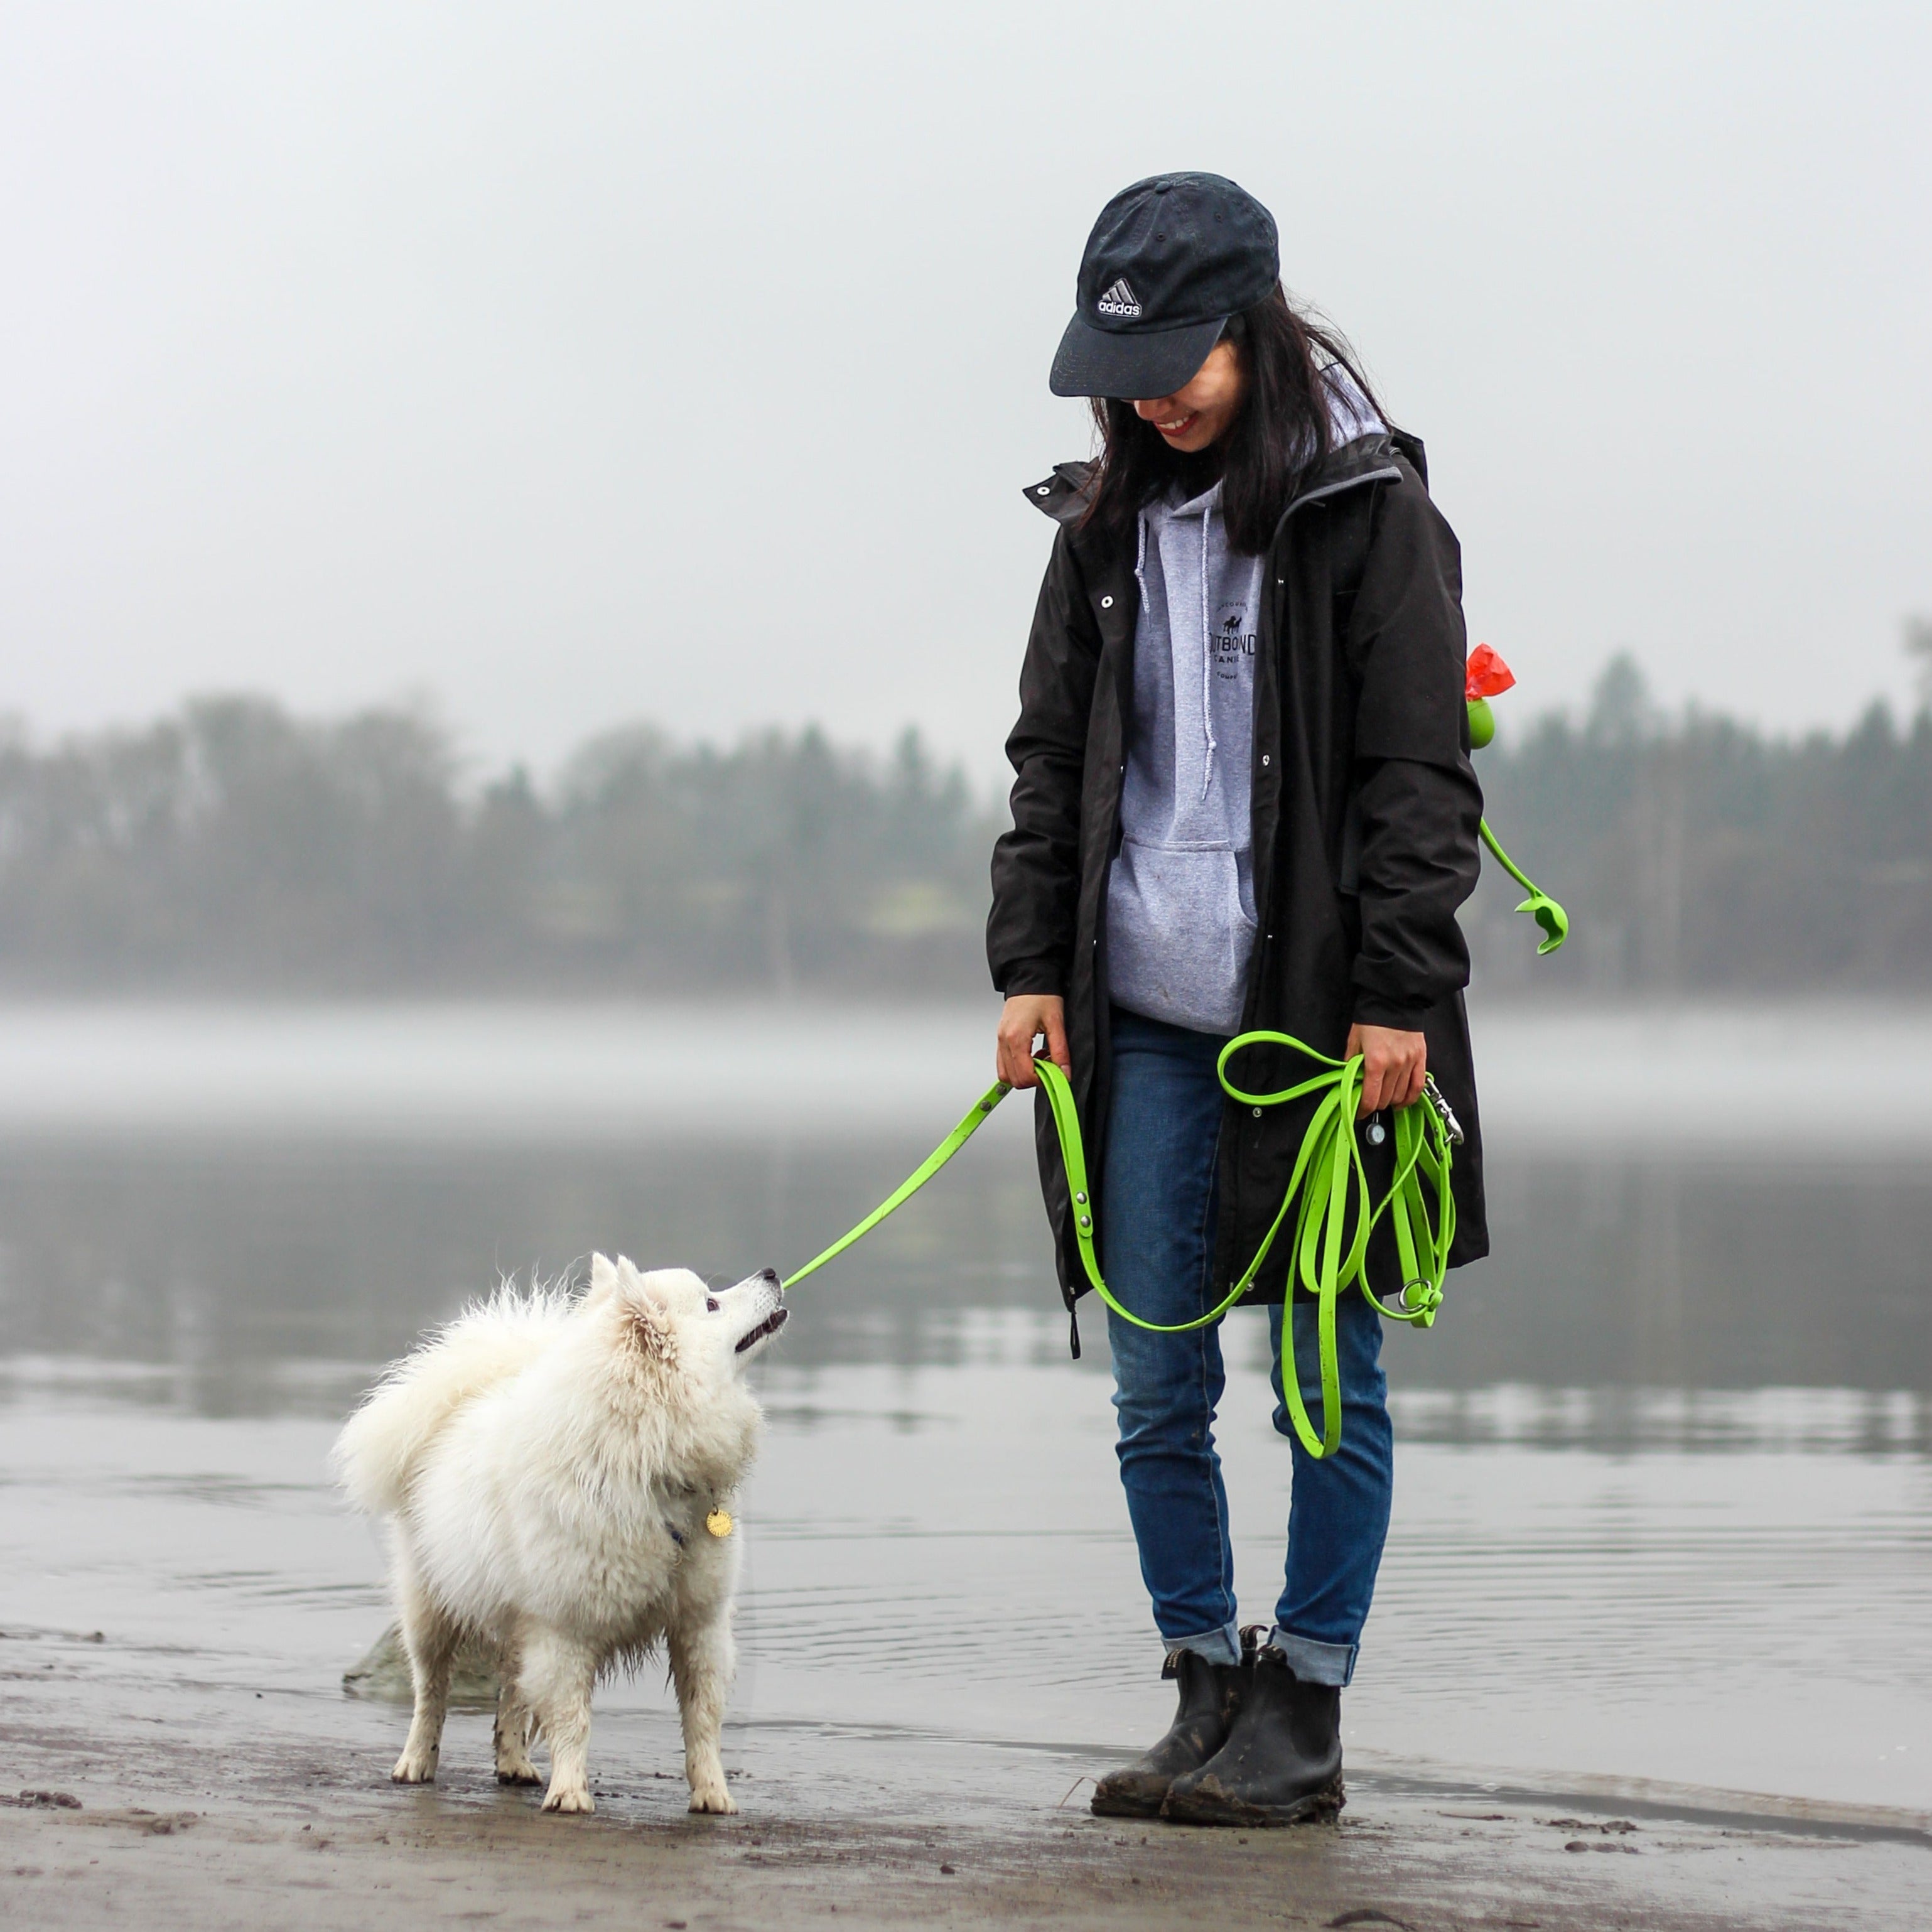 Woman walking her Dog on the Beach using a Green Biothane Hands-Free Long Line